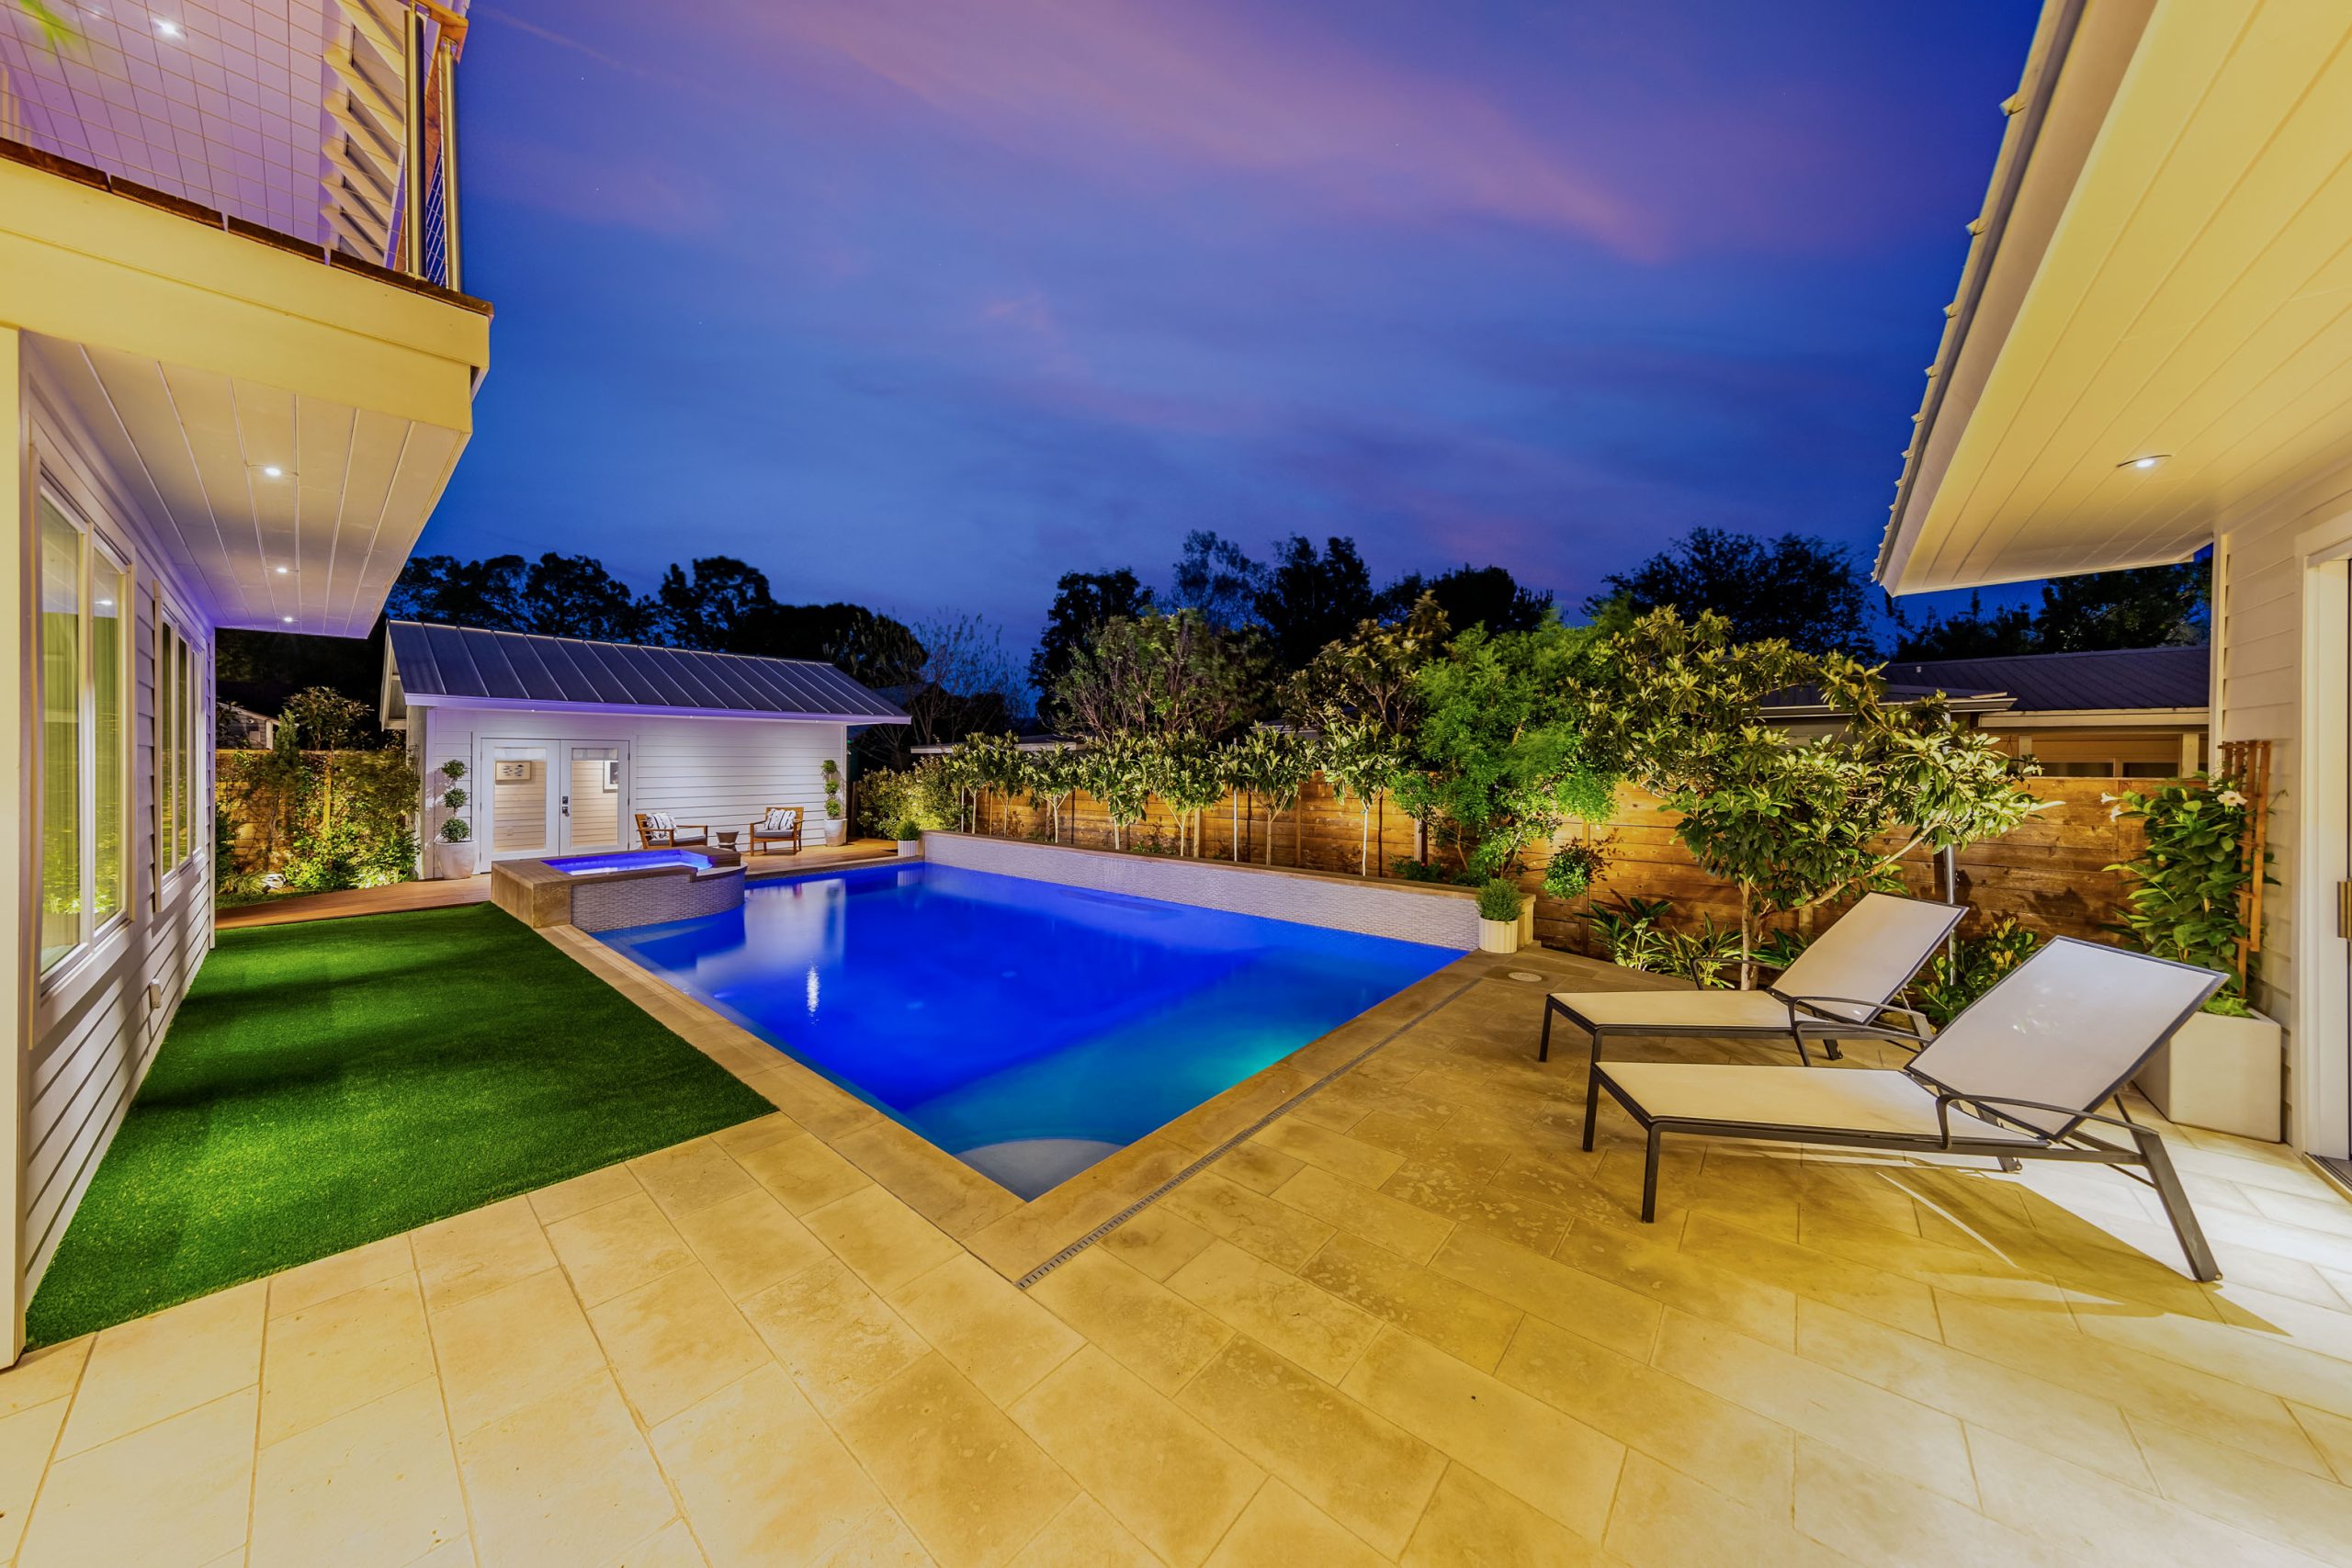 Image of a residential pool in Austin at twilight